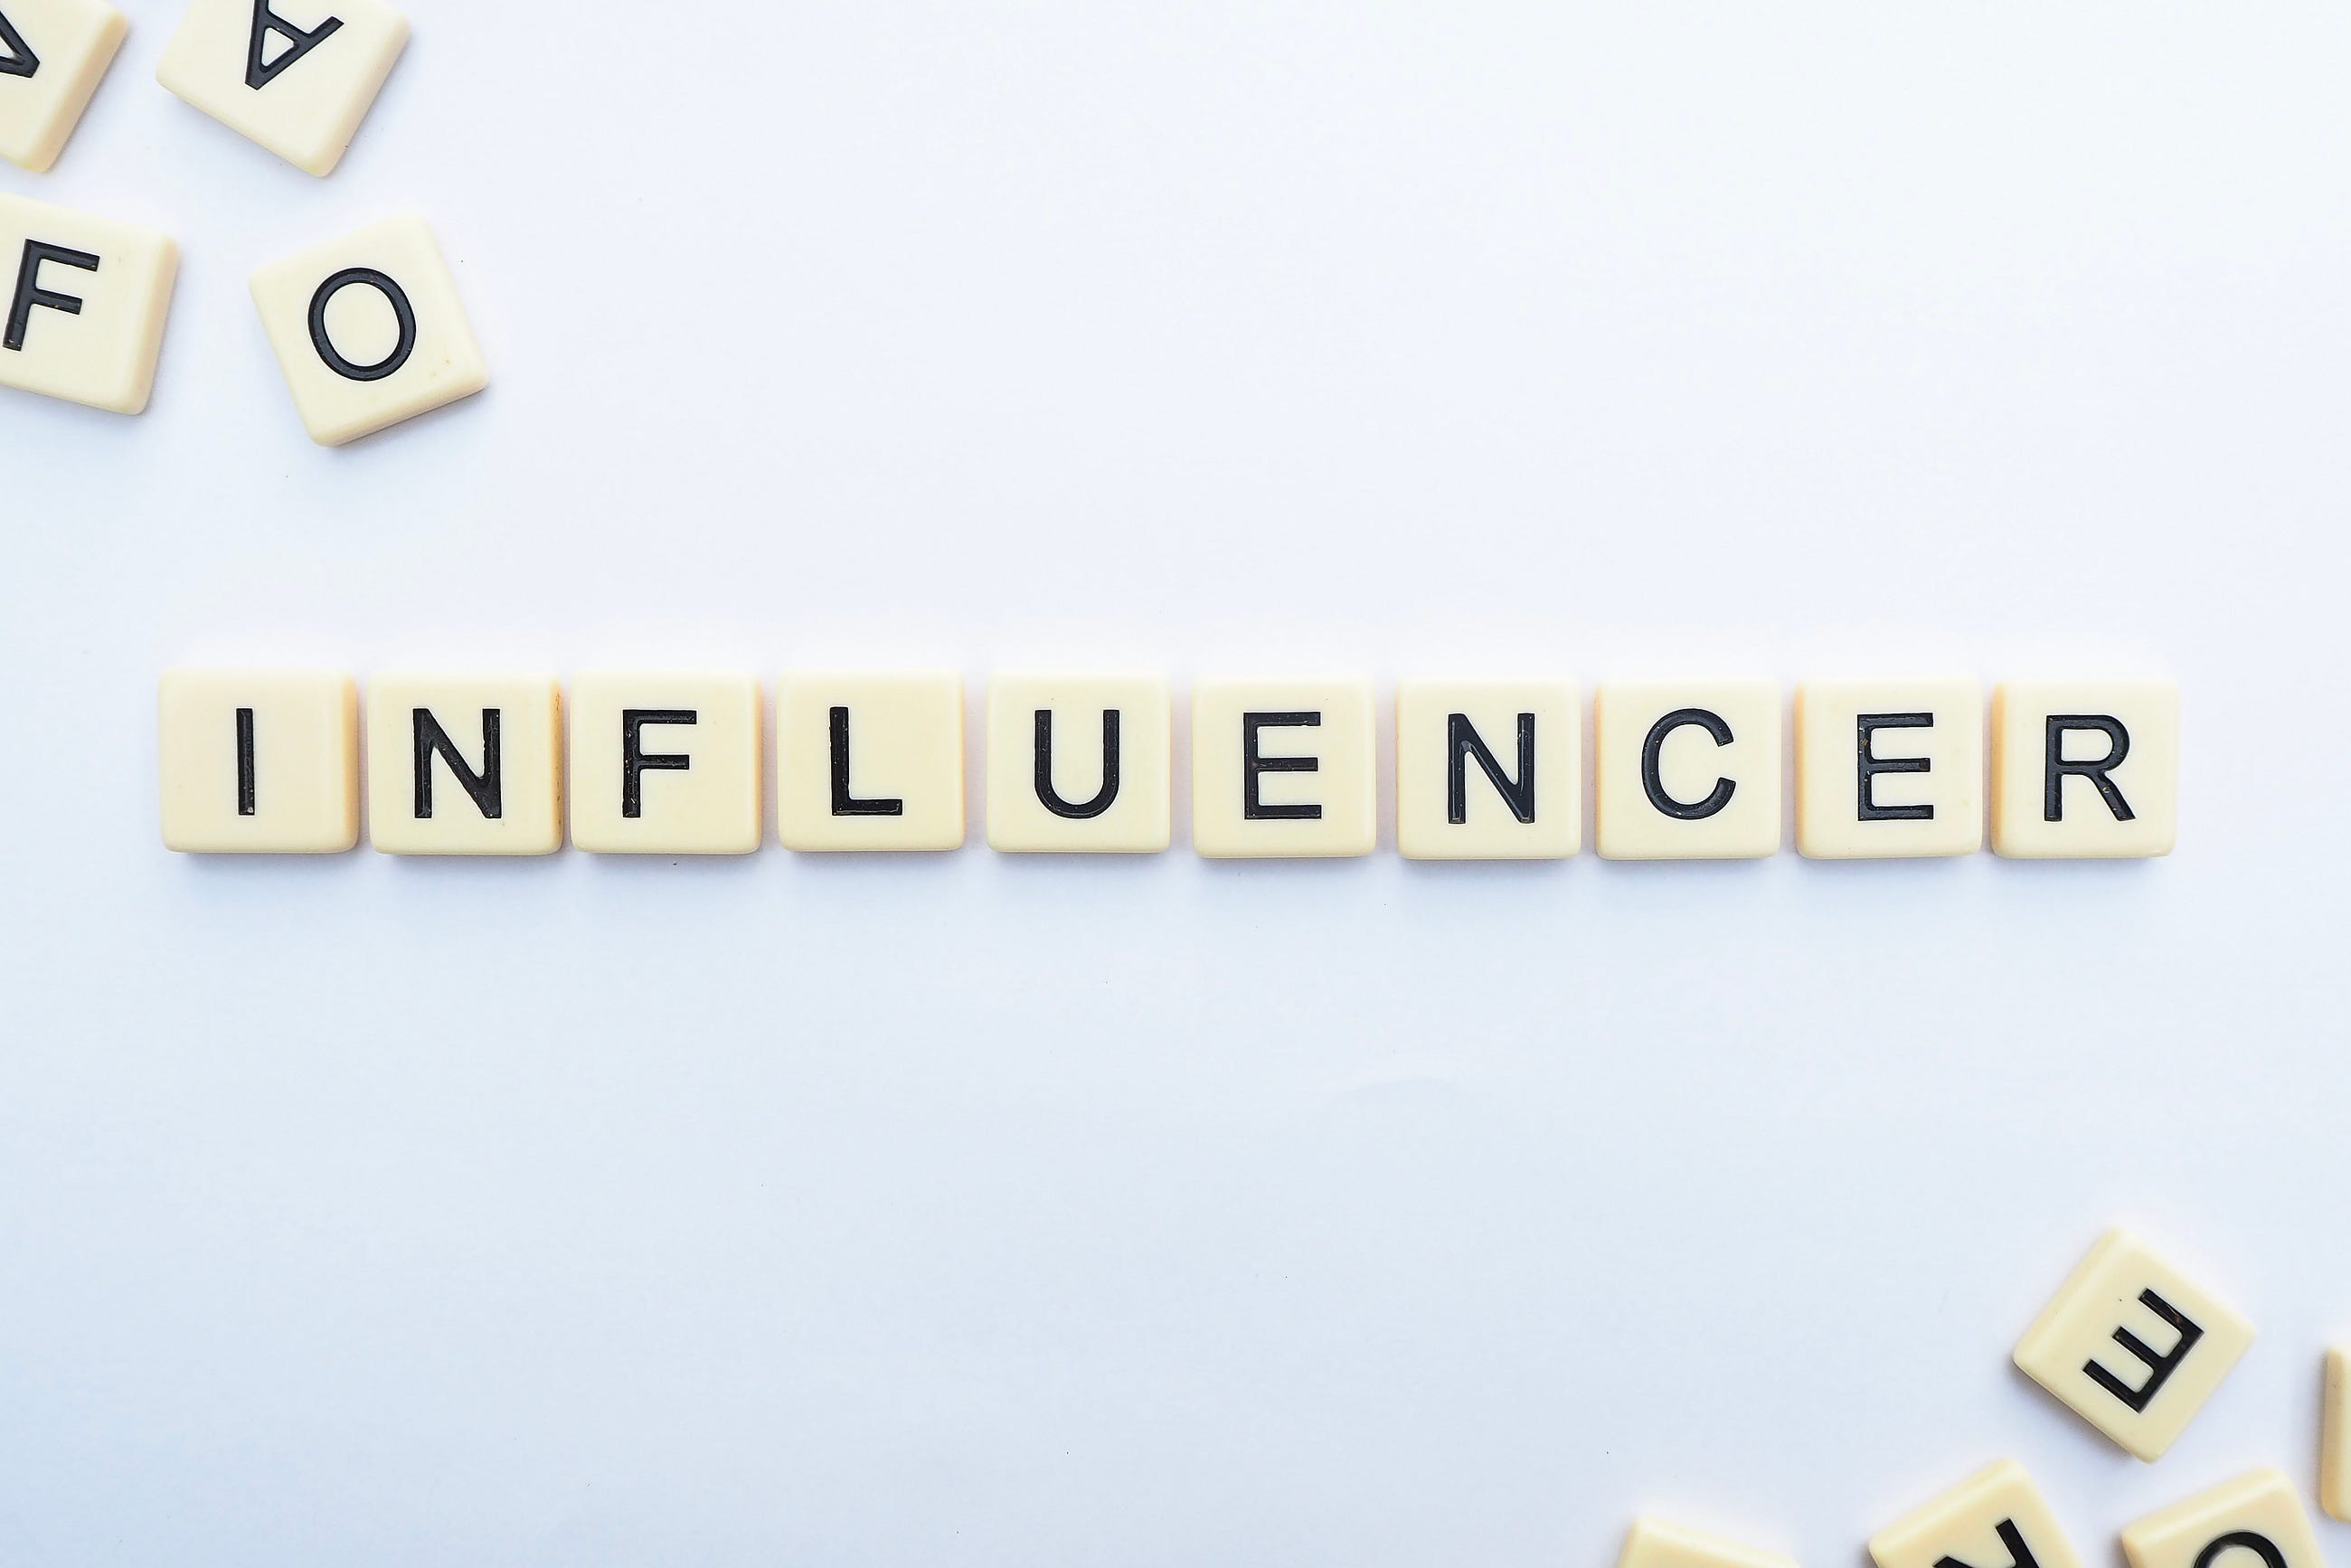 How to make money with influencer marketing In 2022